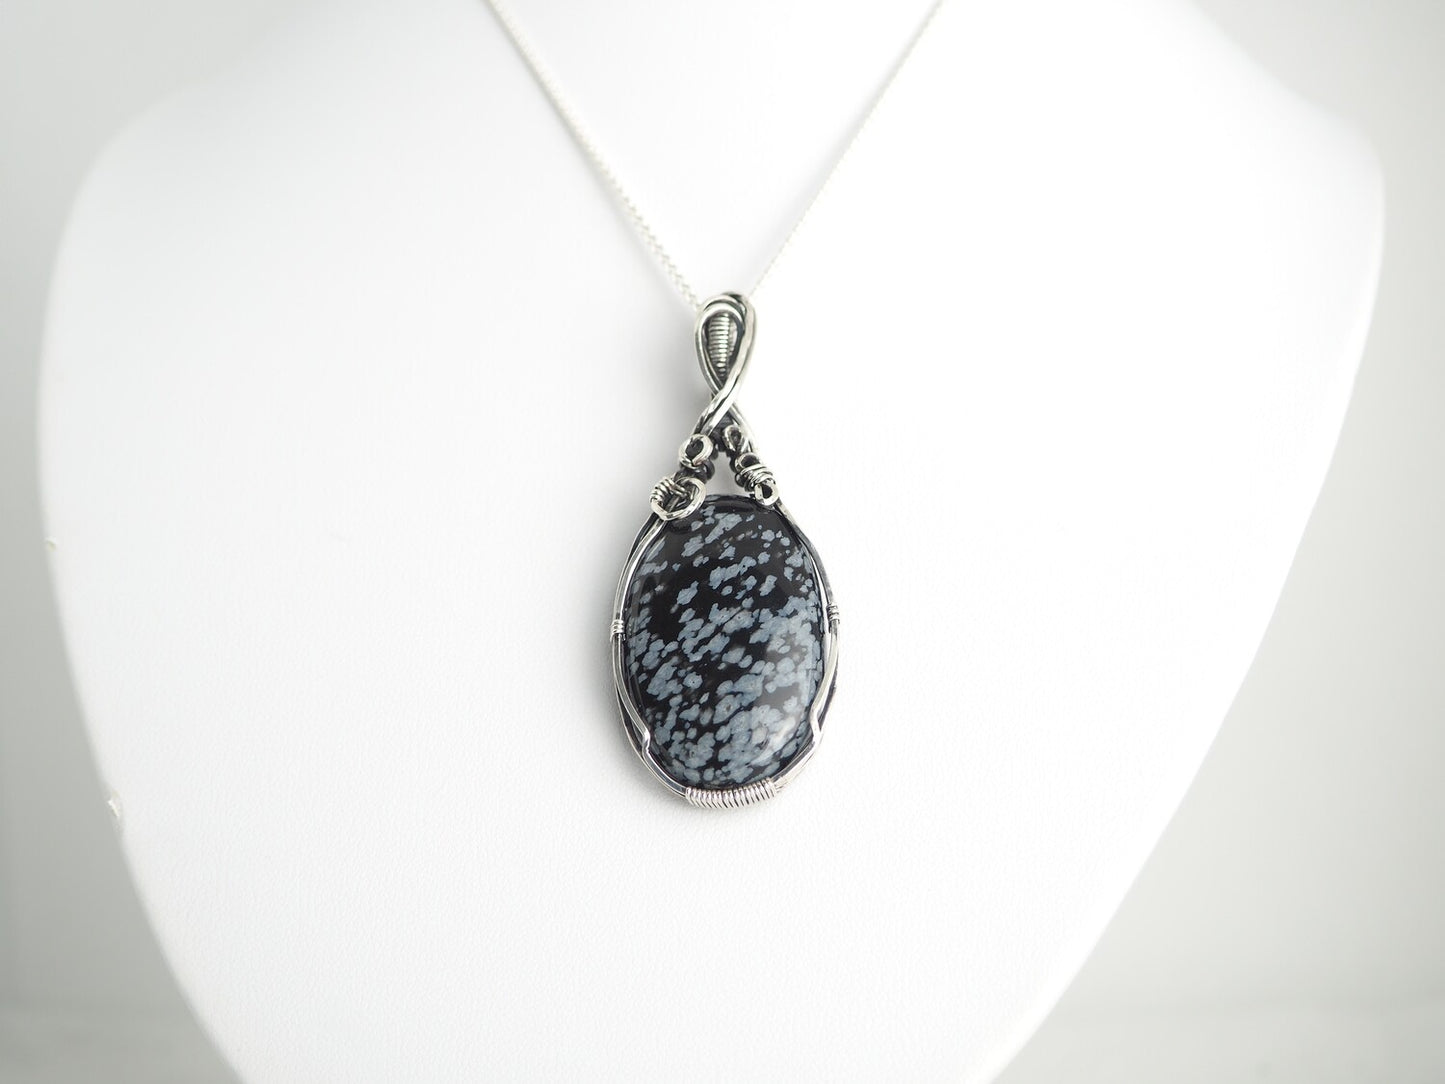 Snowflake Obsidian wrapped in Sterling Silver and Oxidised.